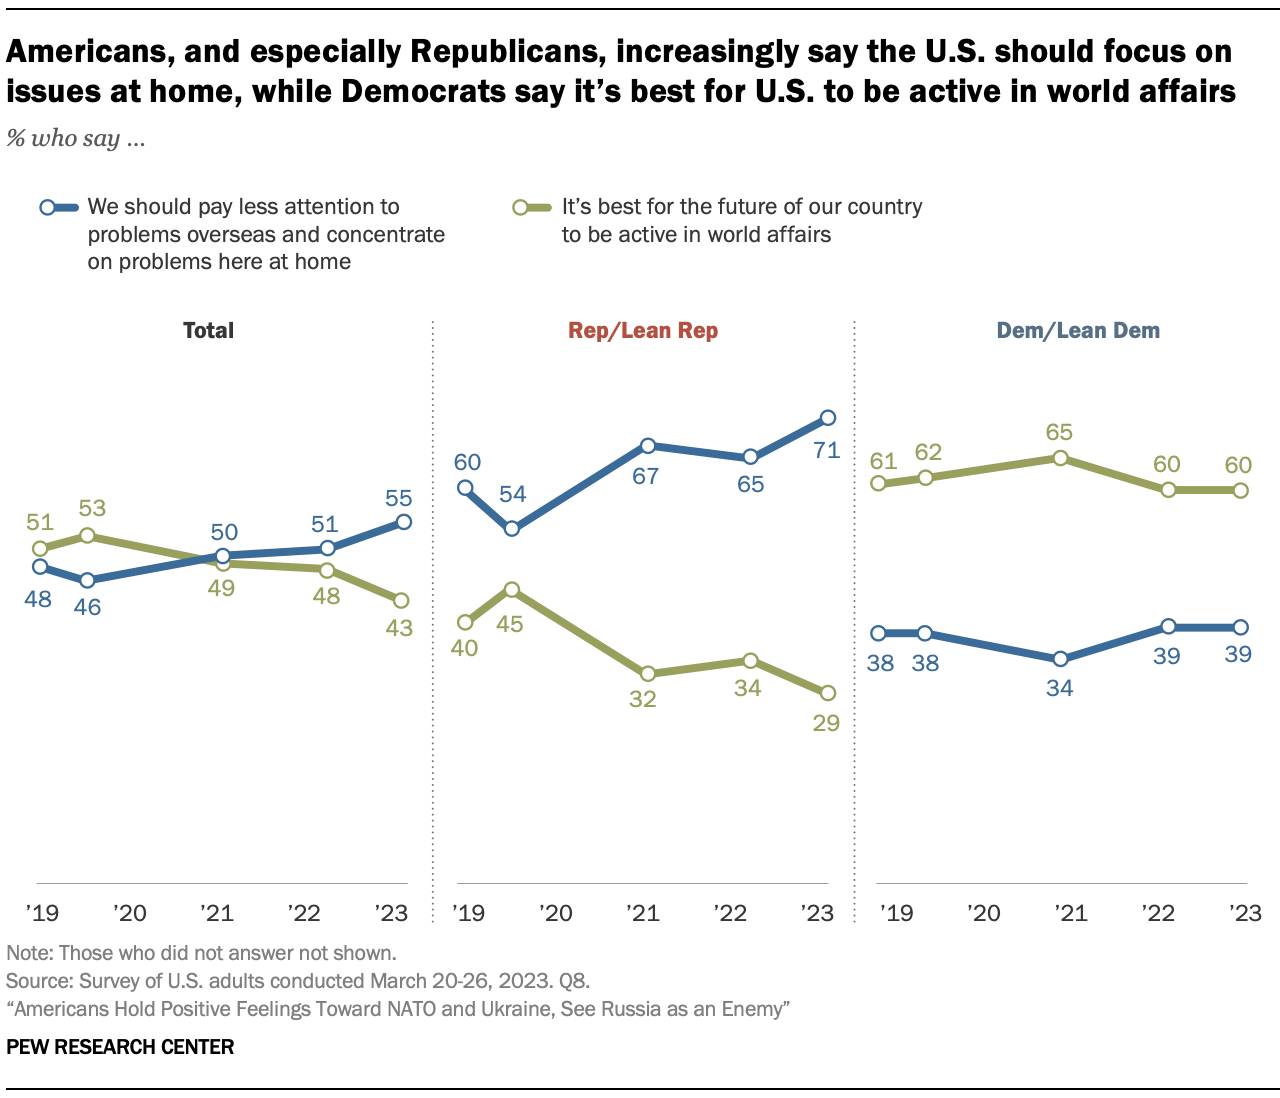 A chart showing Americans, and especially Republicans, increasingly say the U.S. should focus on issues at home, while Democrats say it’s best for U.S. to be active in world affairs